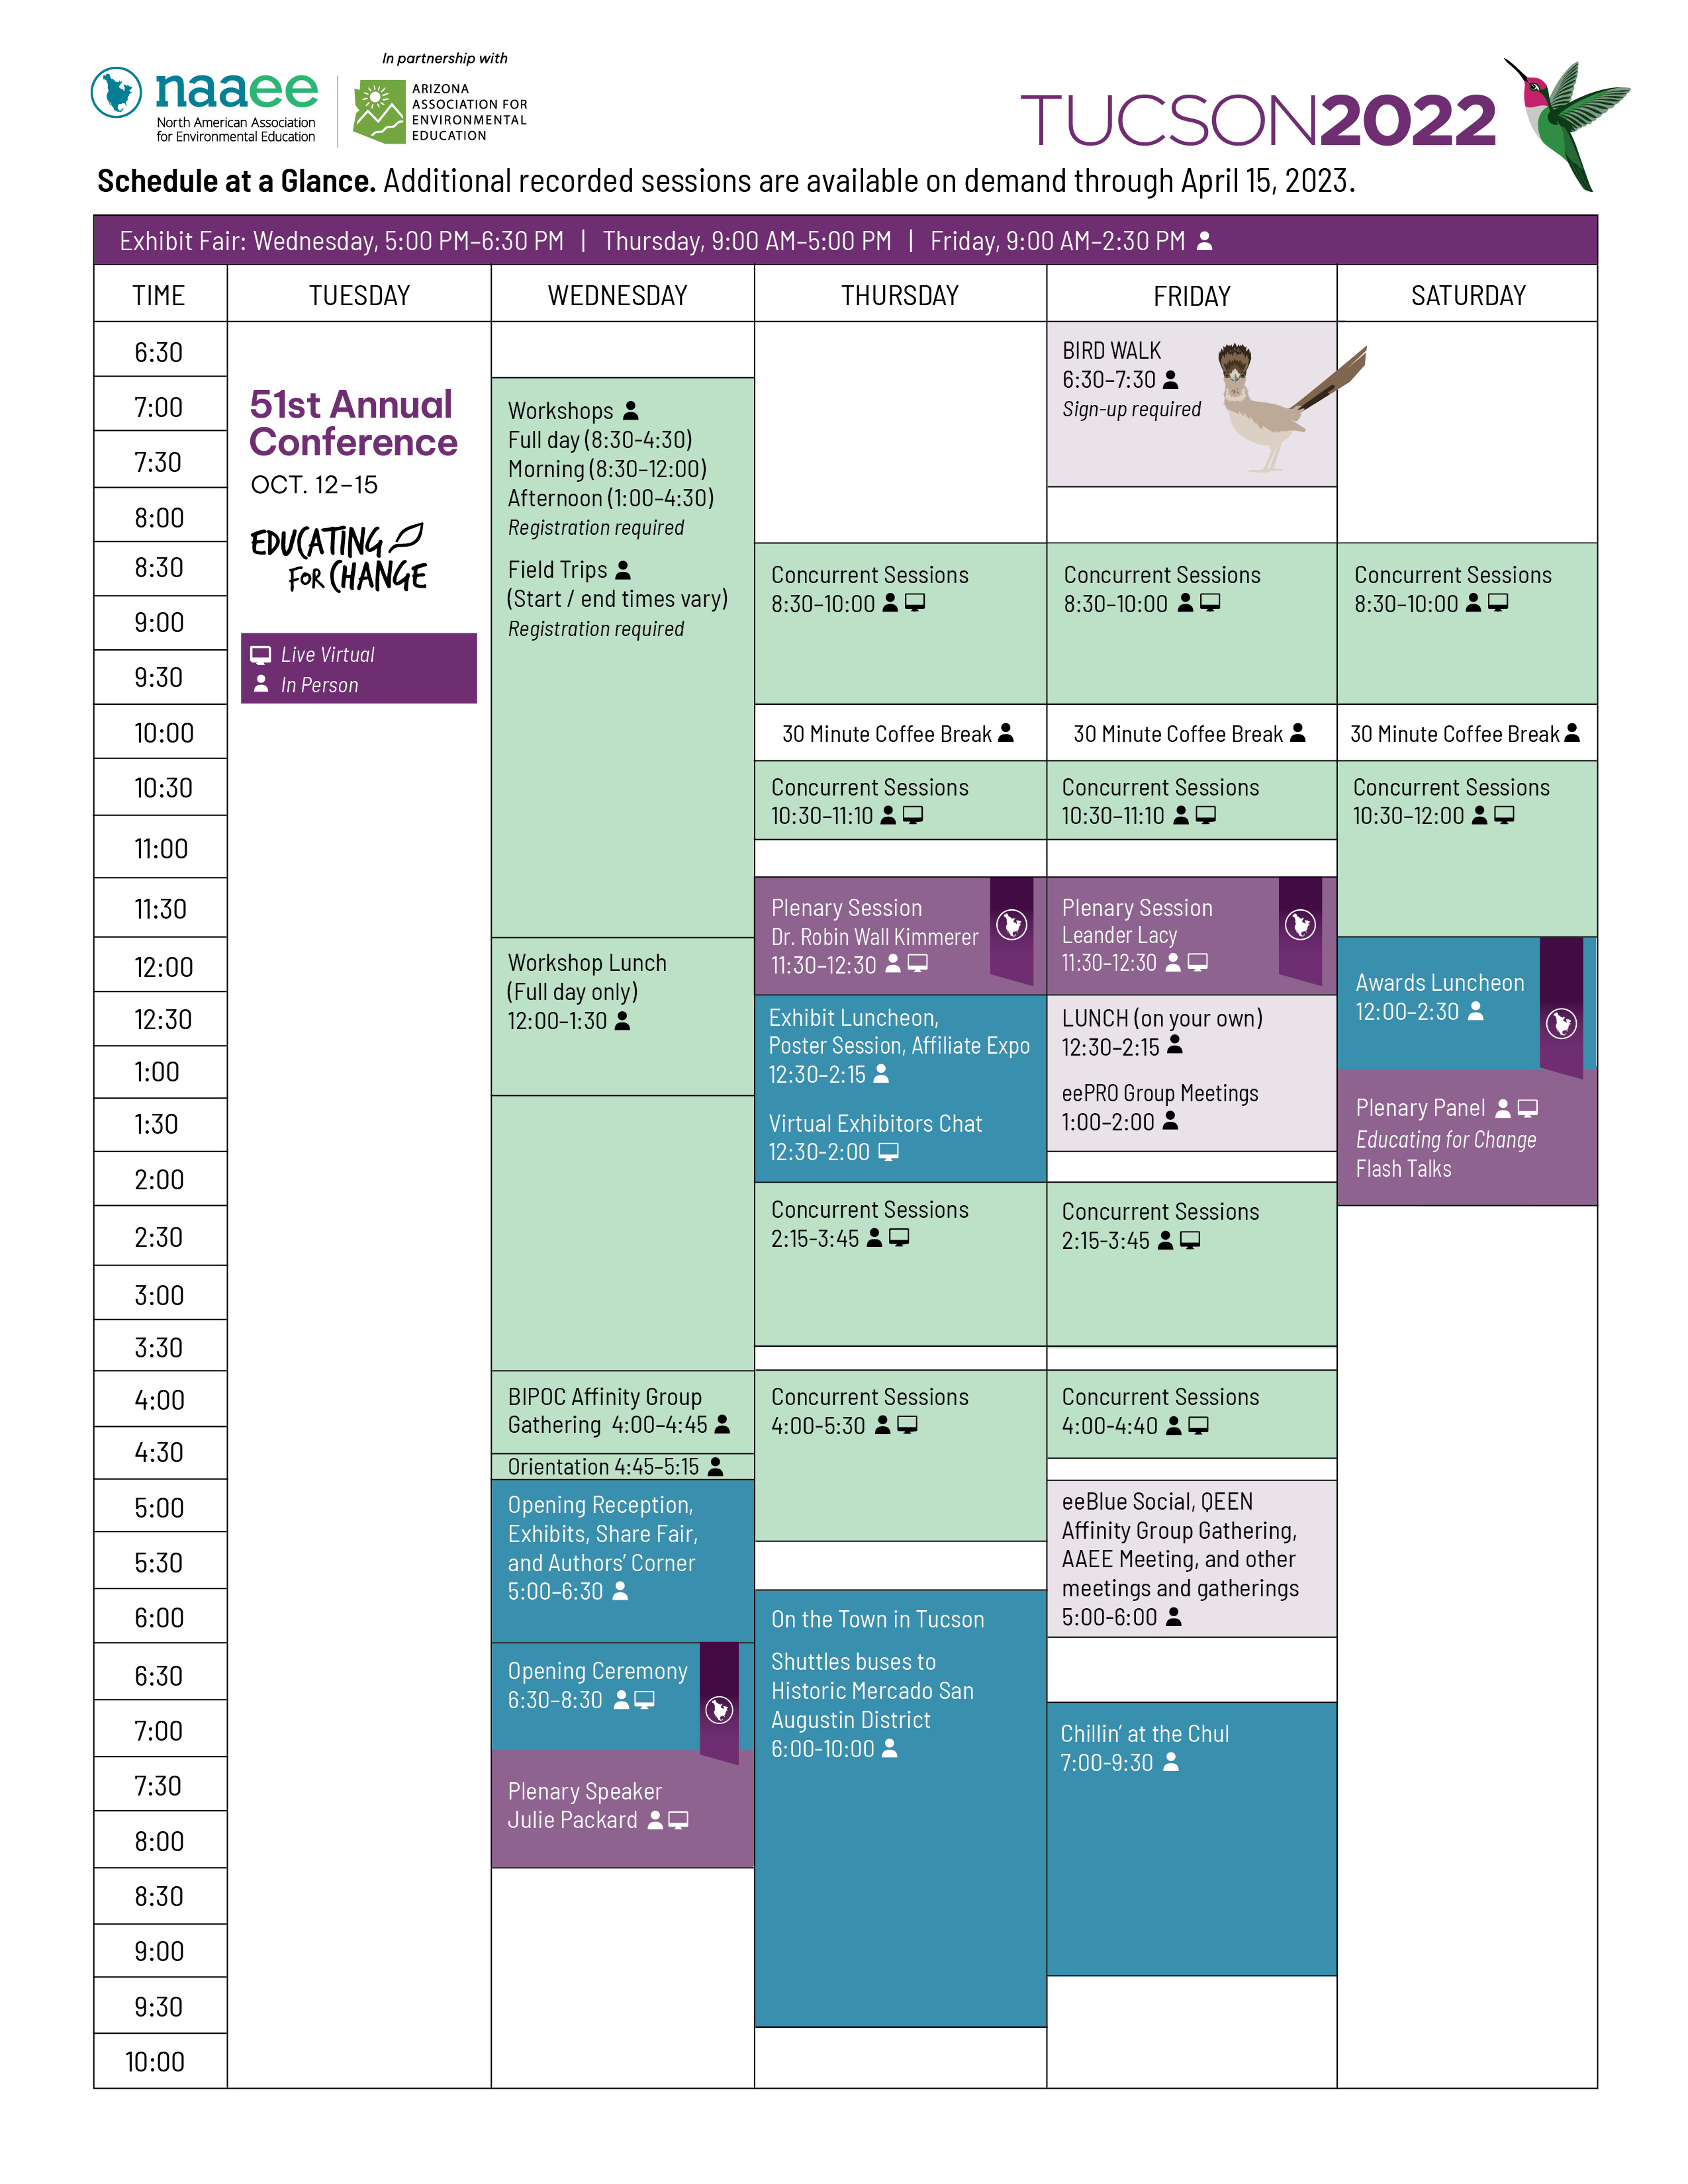 Schedule at a Glance 2022 NAAEE Conference